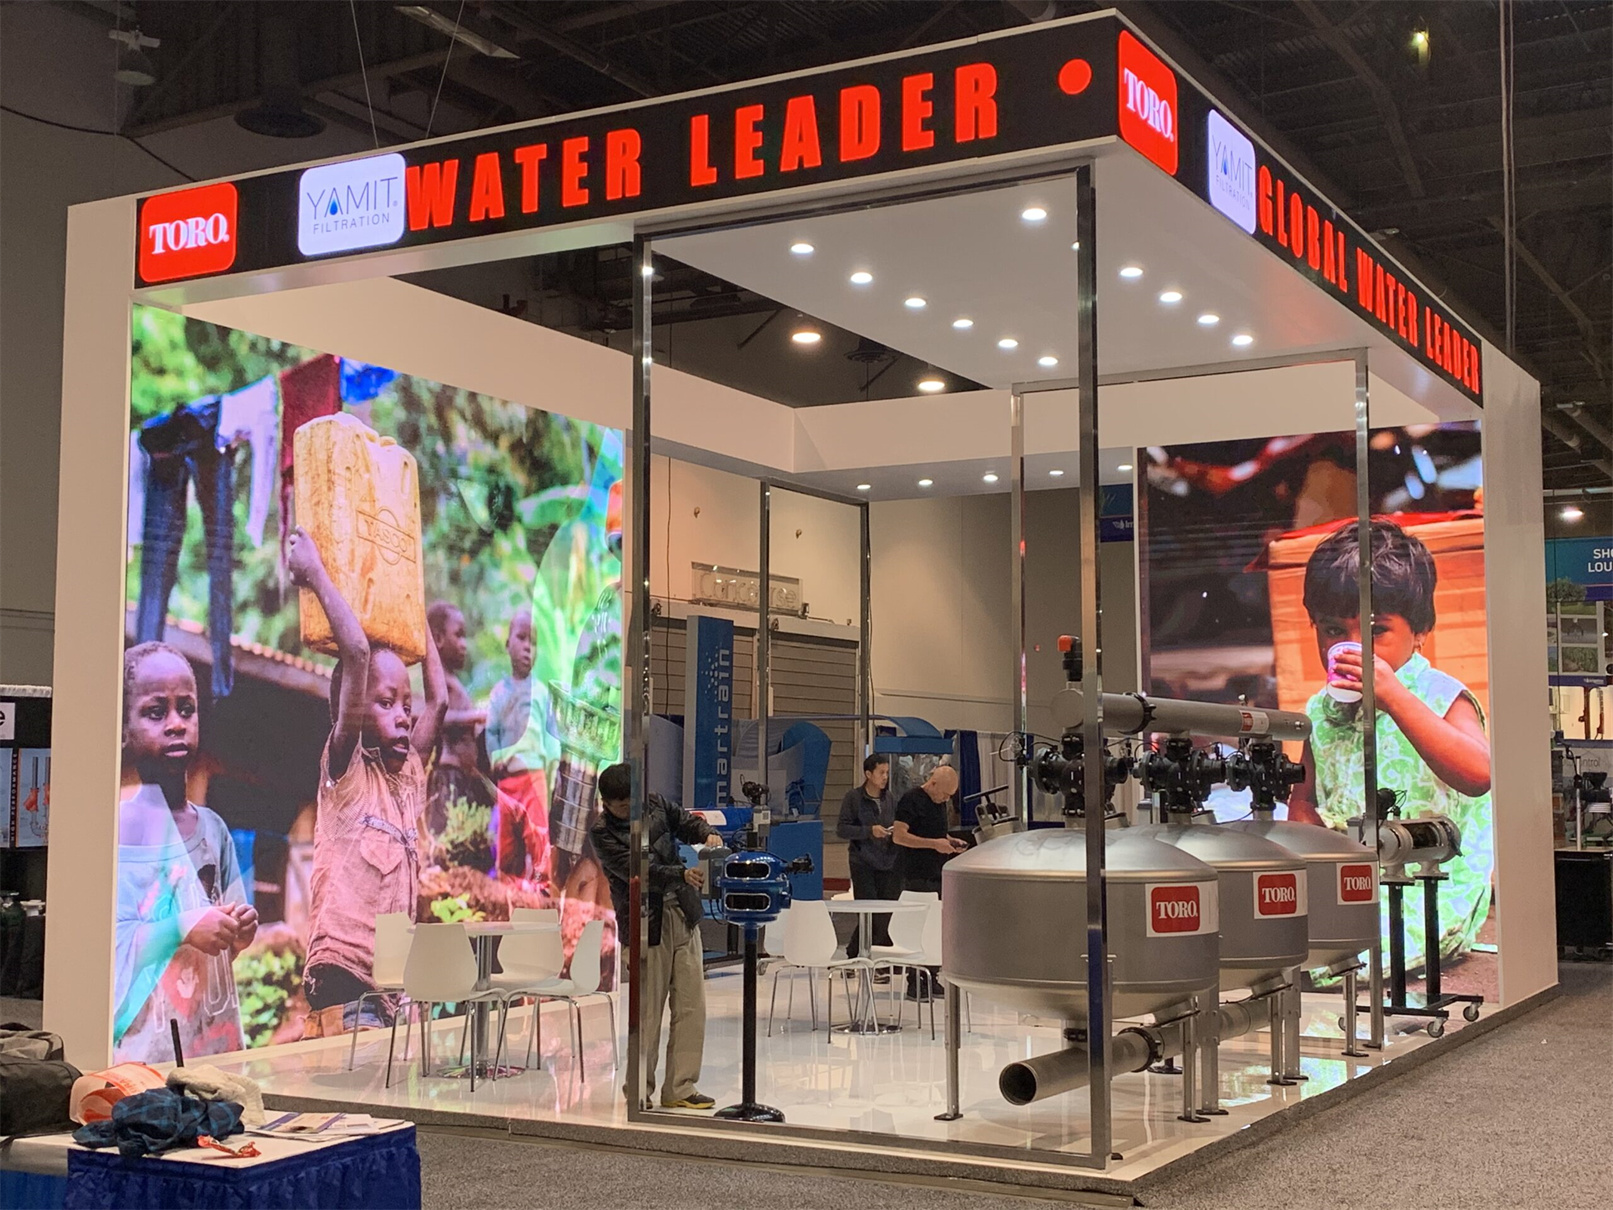 YAMIT Irrigation Show Custom Exhibits & LED Video Wall Booth Design